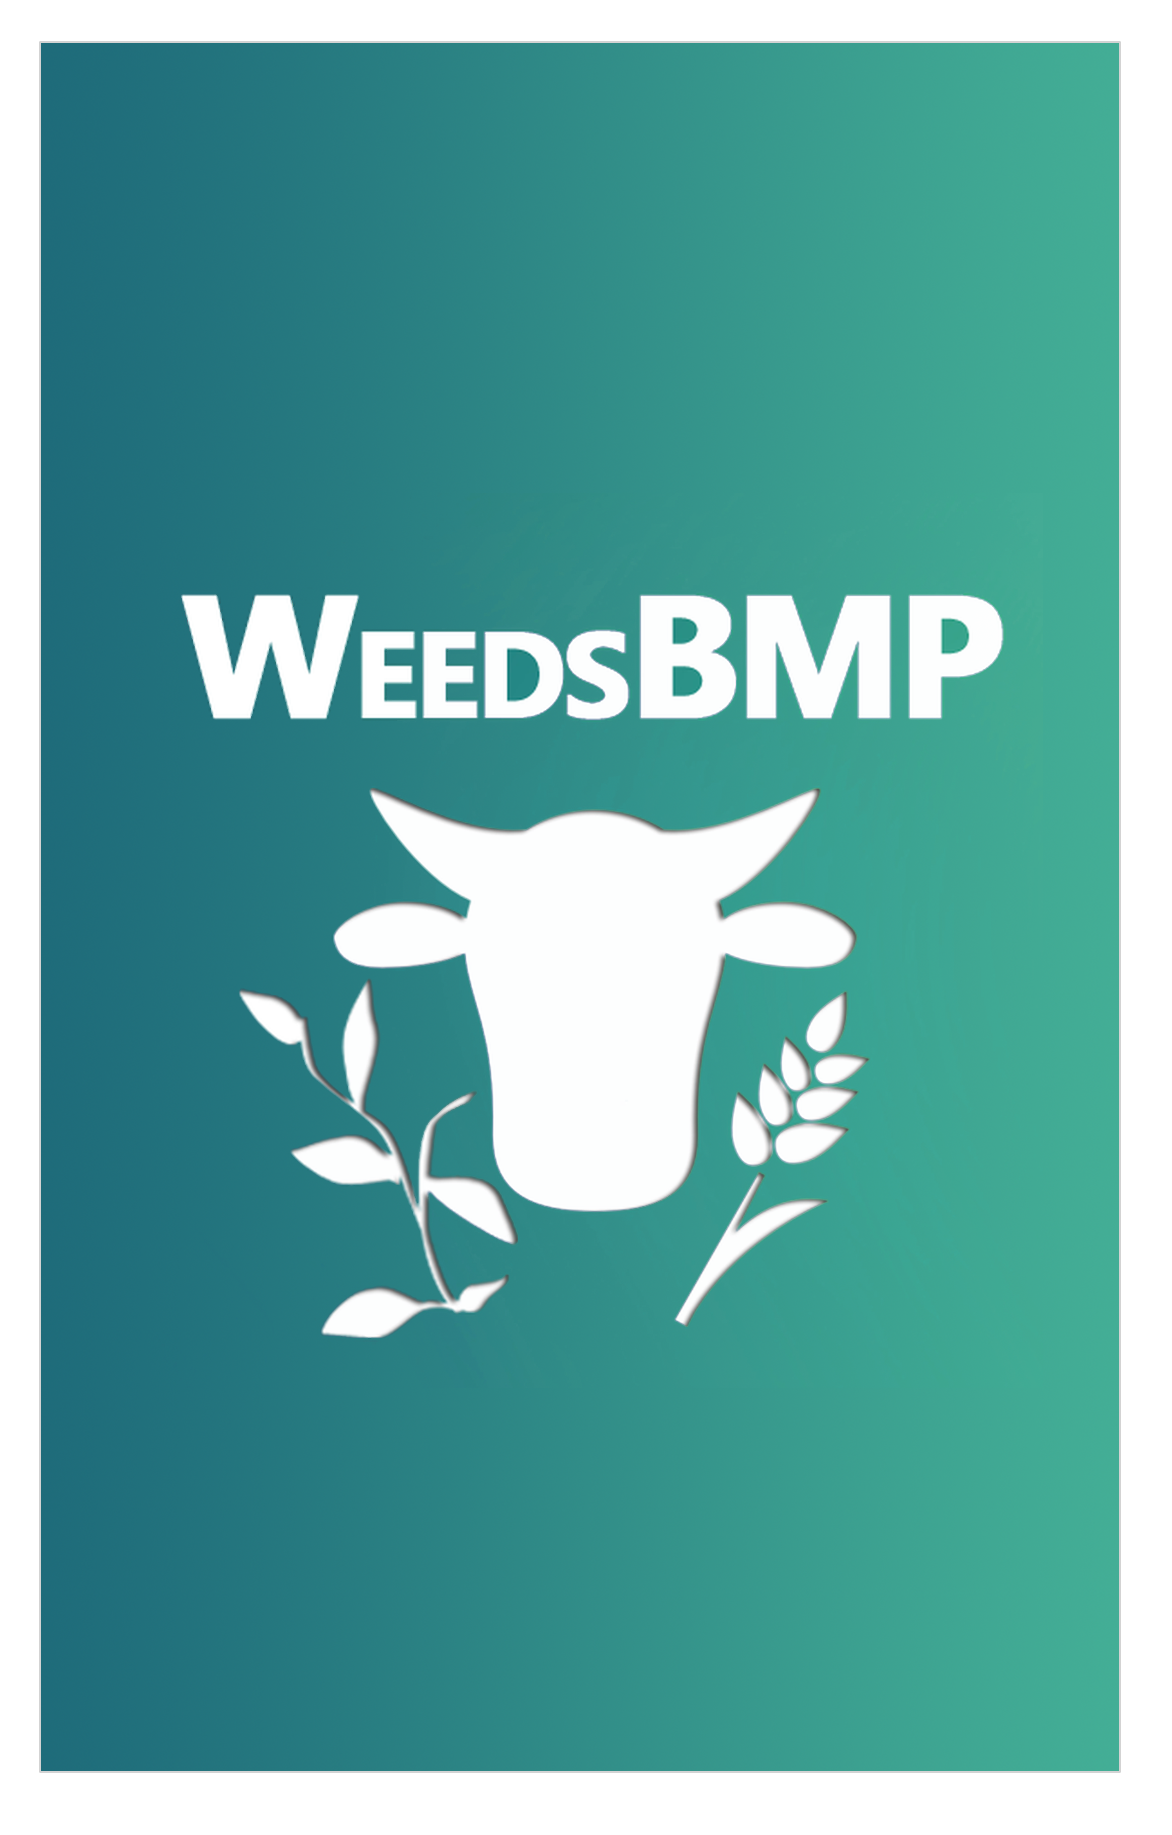 “WeedsBMP” App for Forage and Livestock Producers Now Available